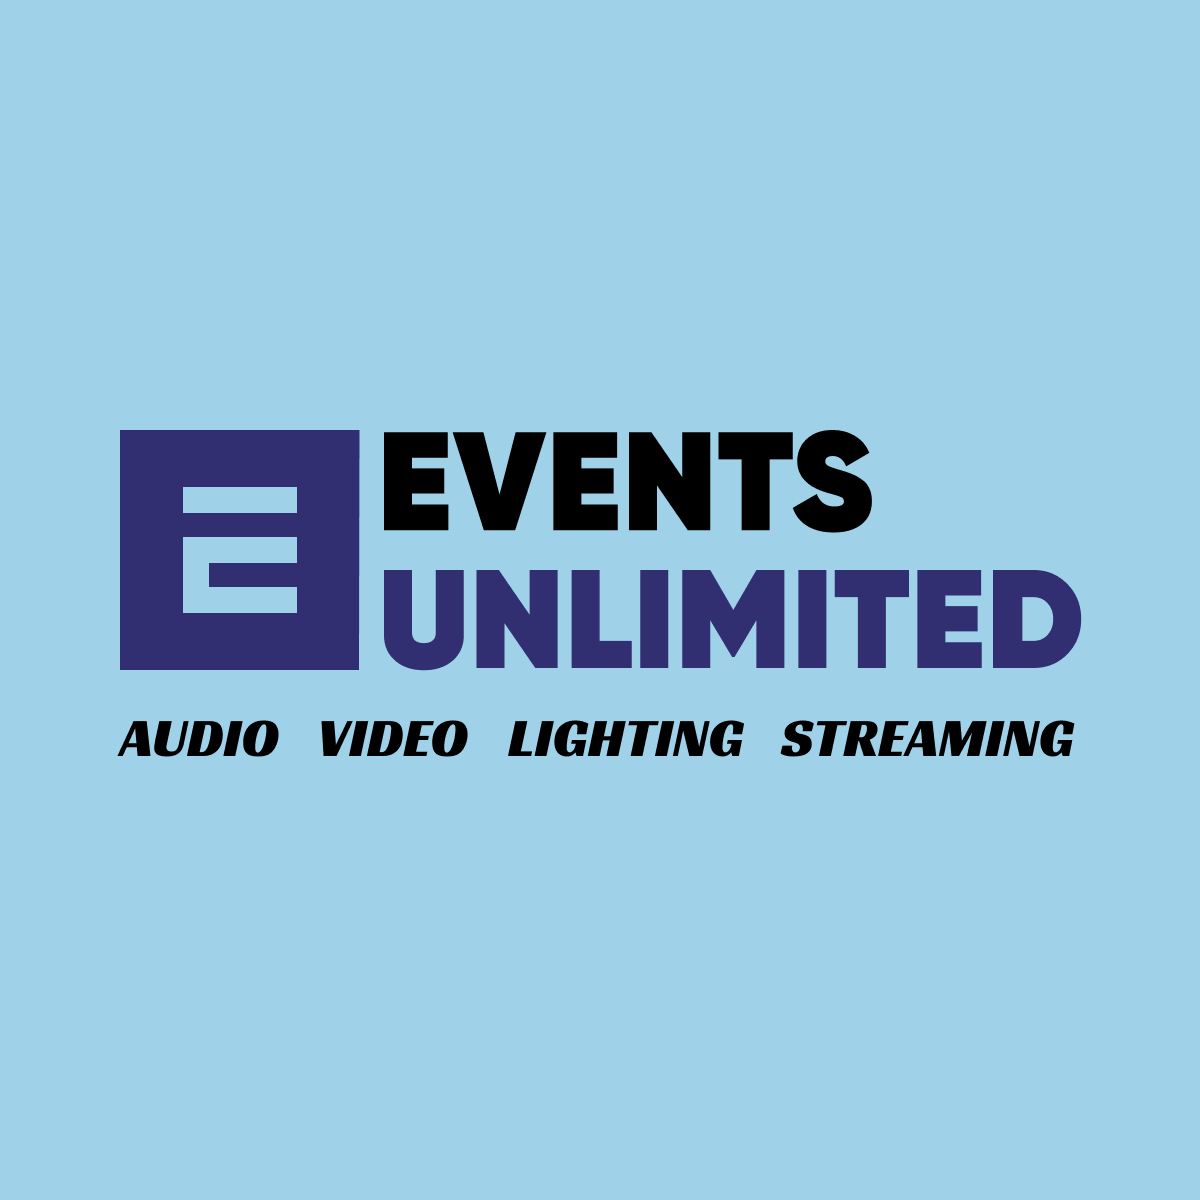 Events Unlimited developed by ANW